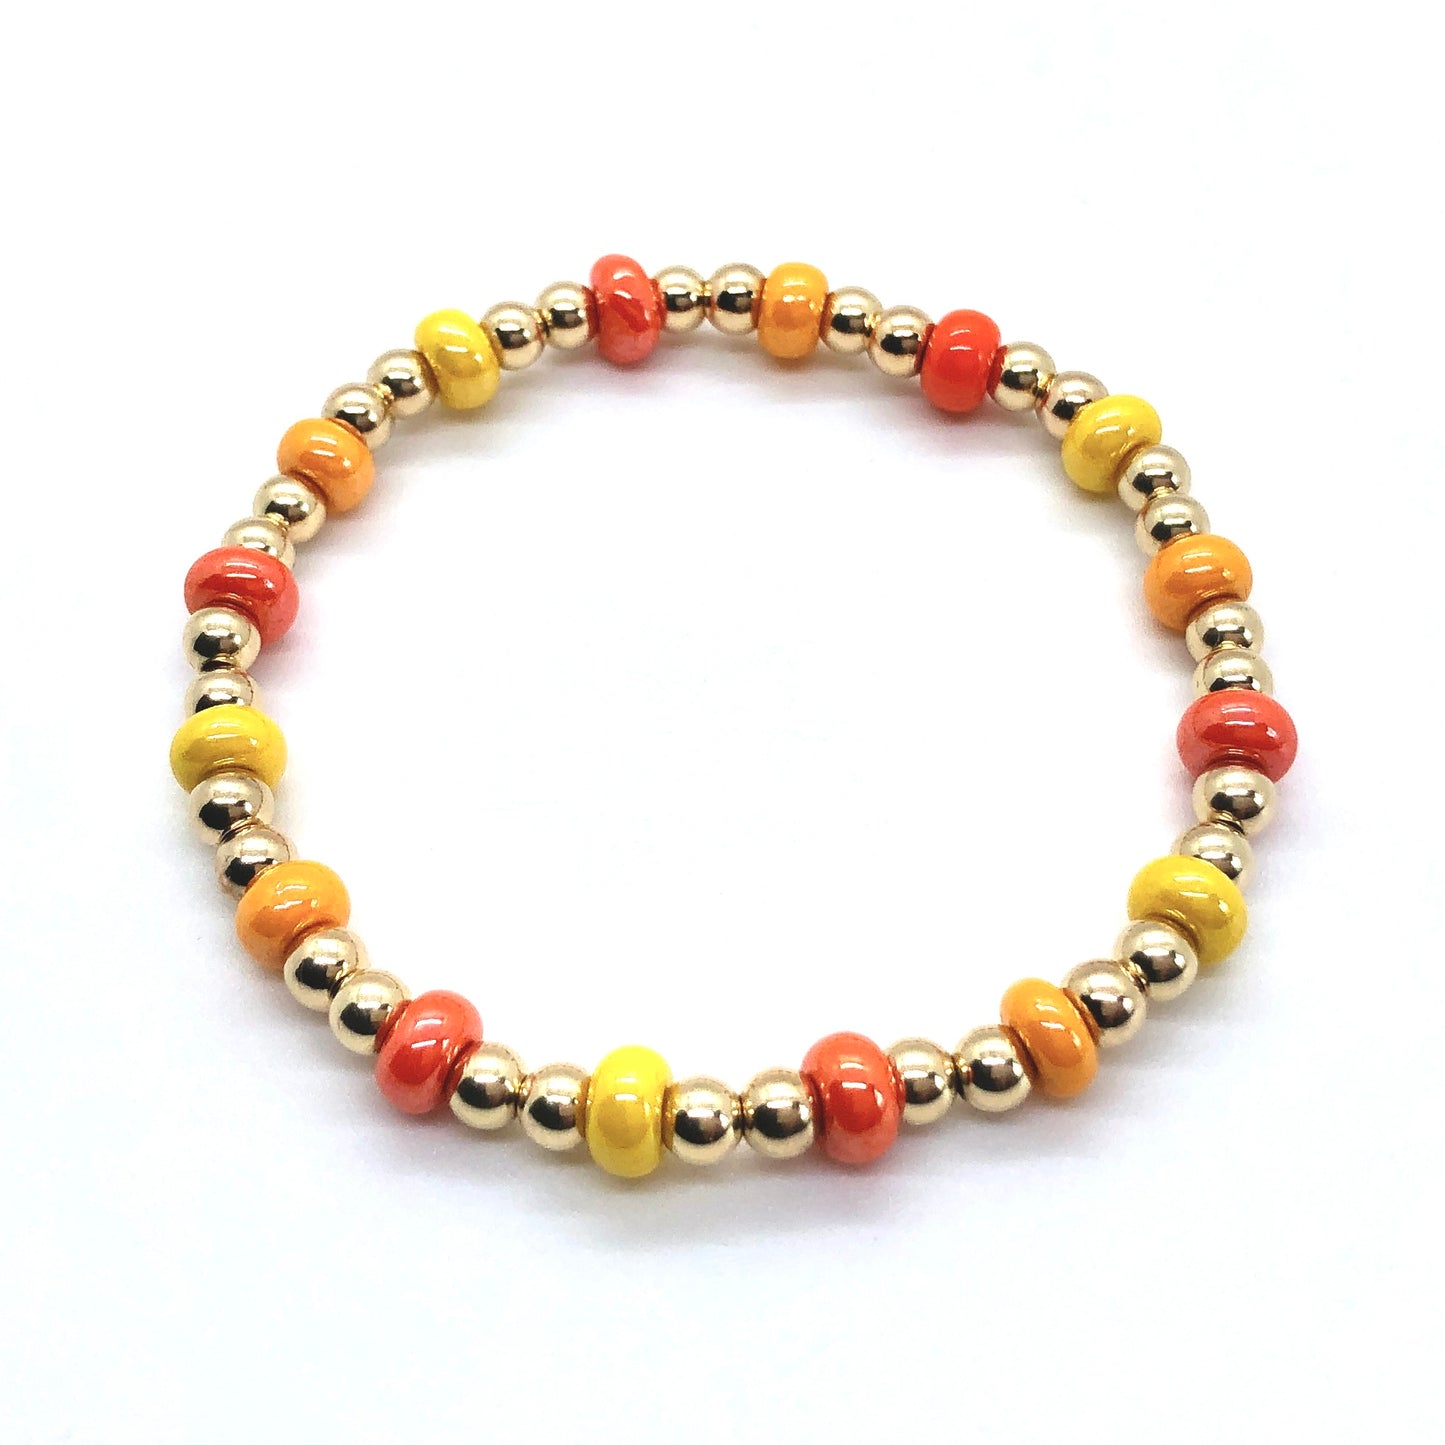 4mm gold ball stretch bracelet with alternating orange and yellow beads on elastic stretch cord.